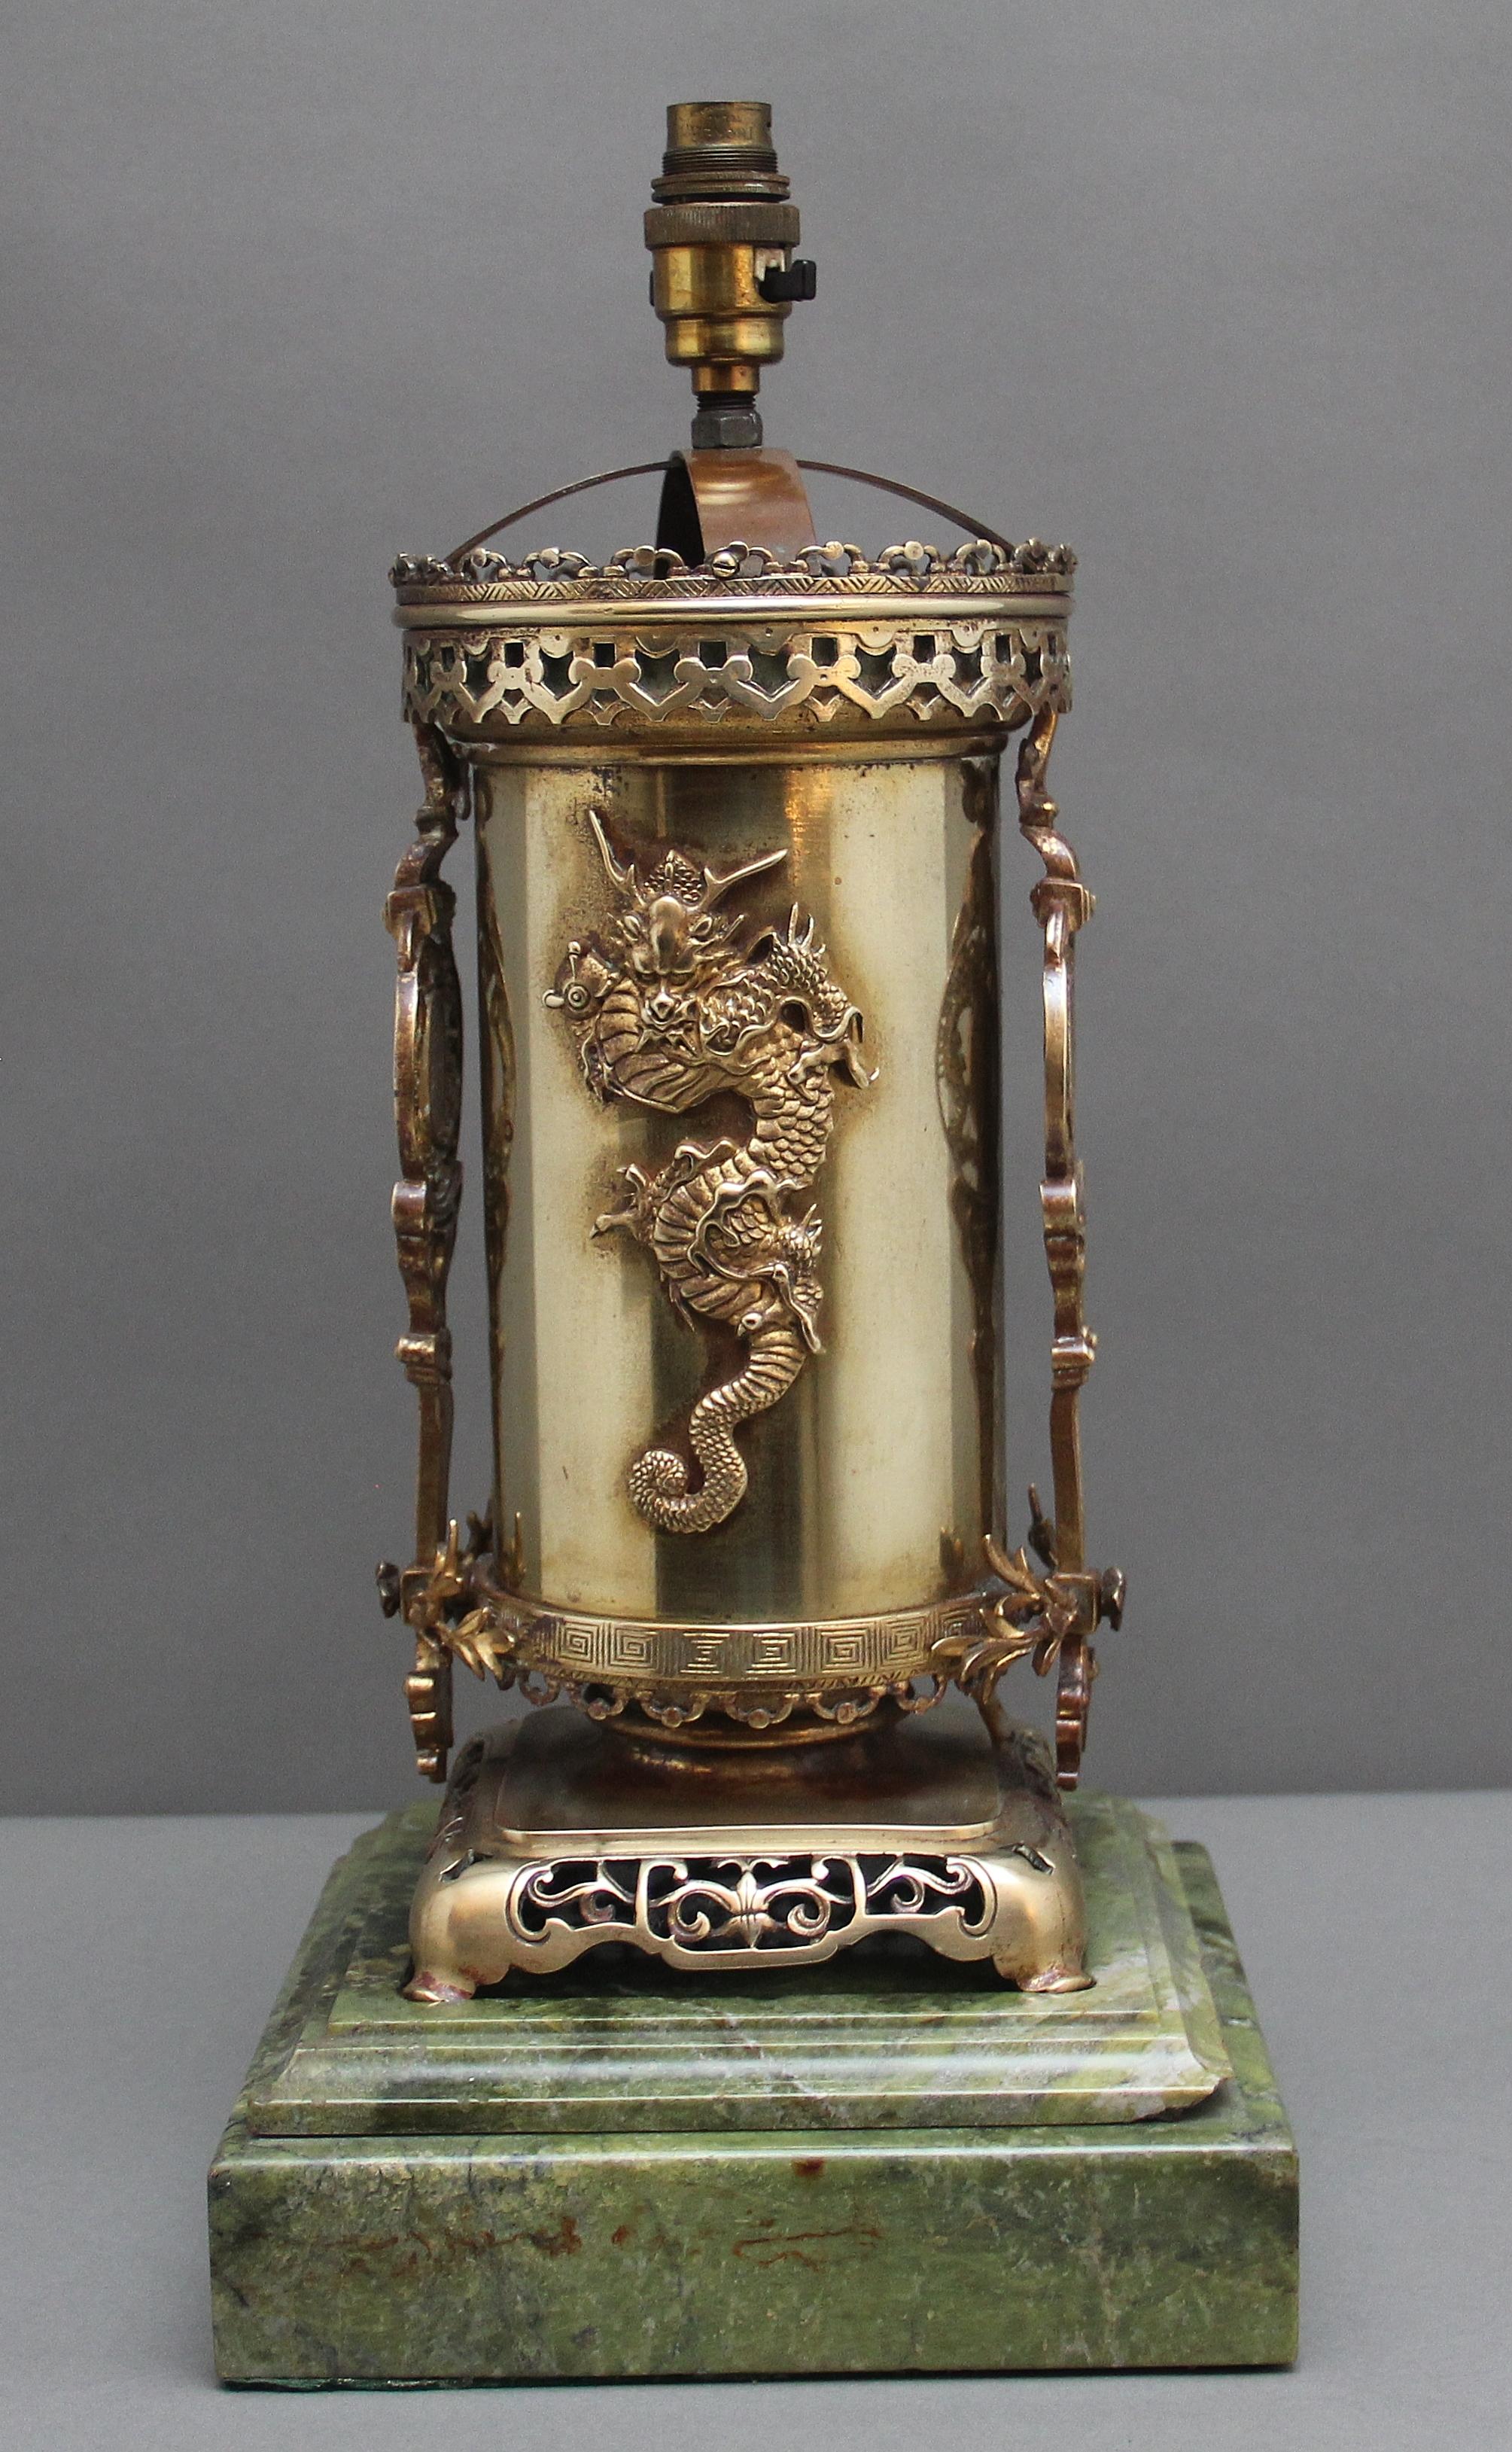 A lovely quality 19th Century Japanese  lamp in the oriental manner, with ferocious dragons and intricate pierced decorations, sitting on a green platform marble base.  Fitted for electricity.   Circa 1880.  Please note there are some chips to the